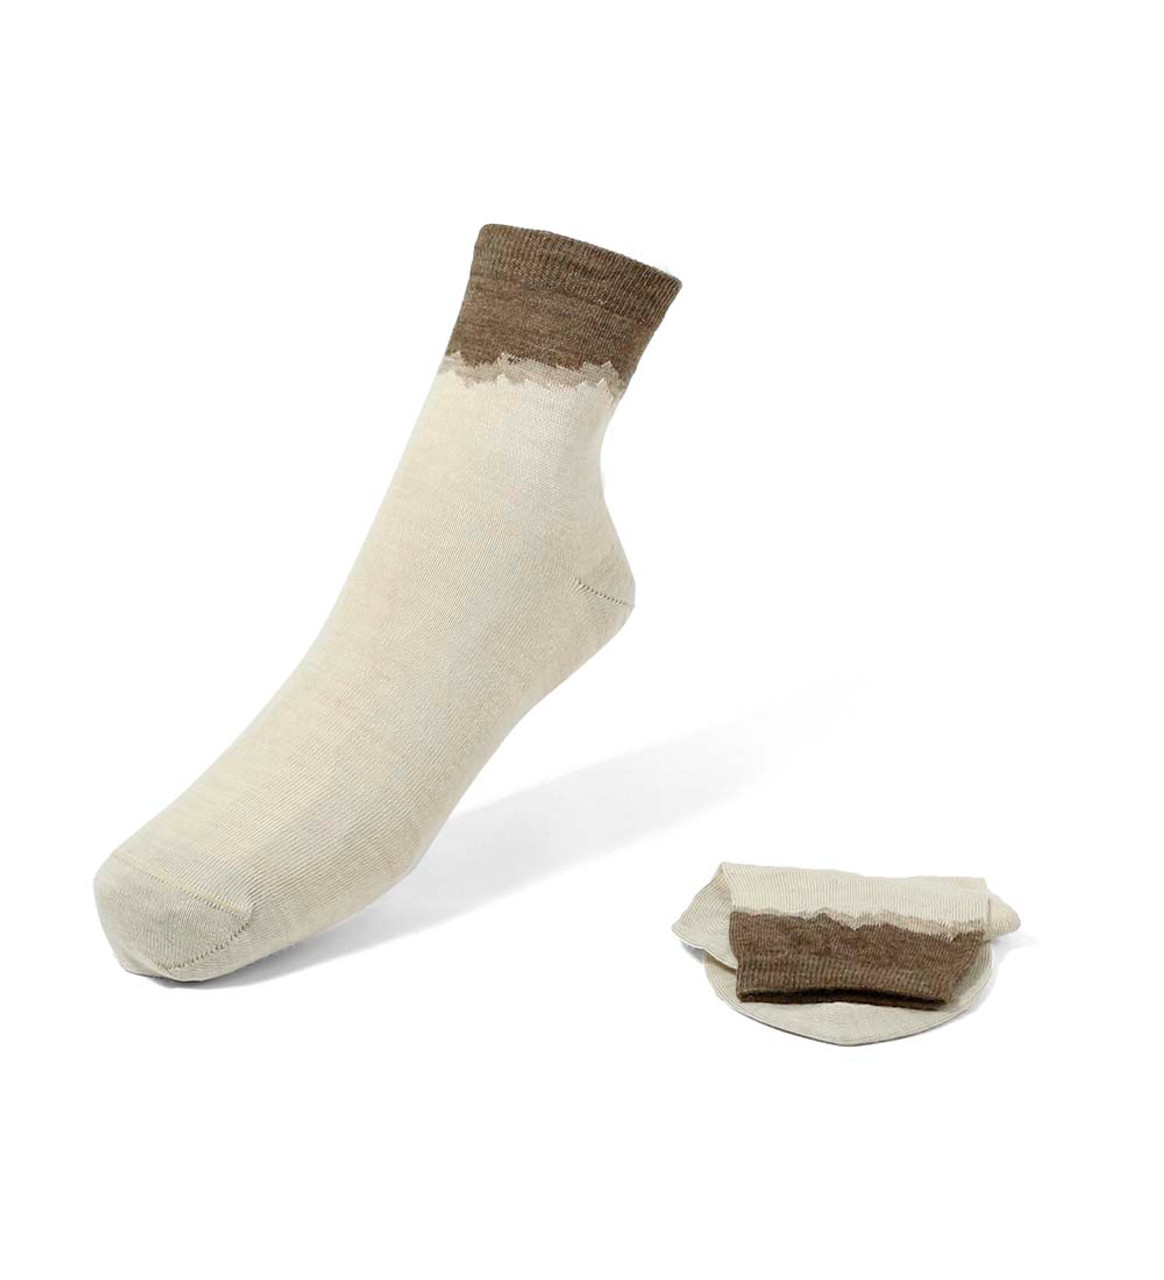 Baby Alpaca Wool Knitted Short Socks Soft And Warm Size Small 5-7.5 Two  Color Design For Women Peru - Alpaca Warehouse